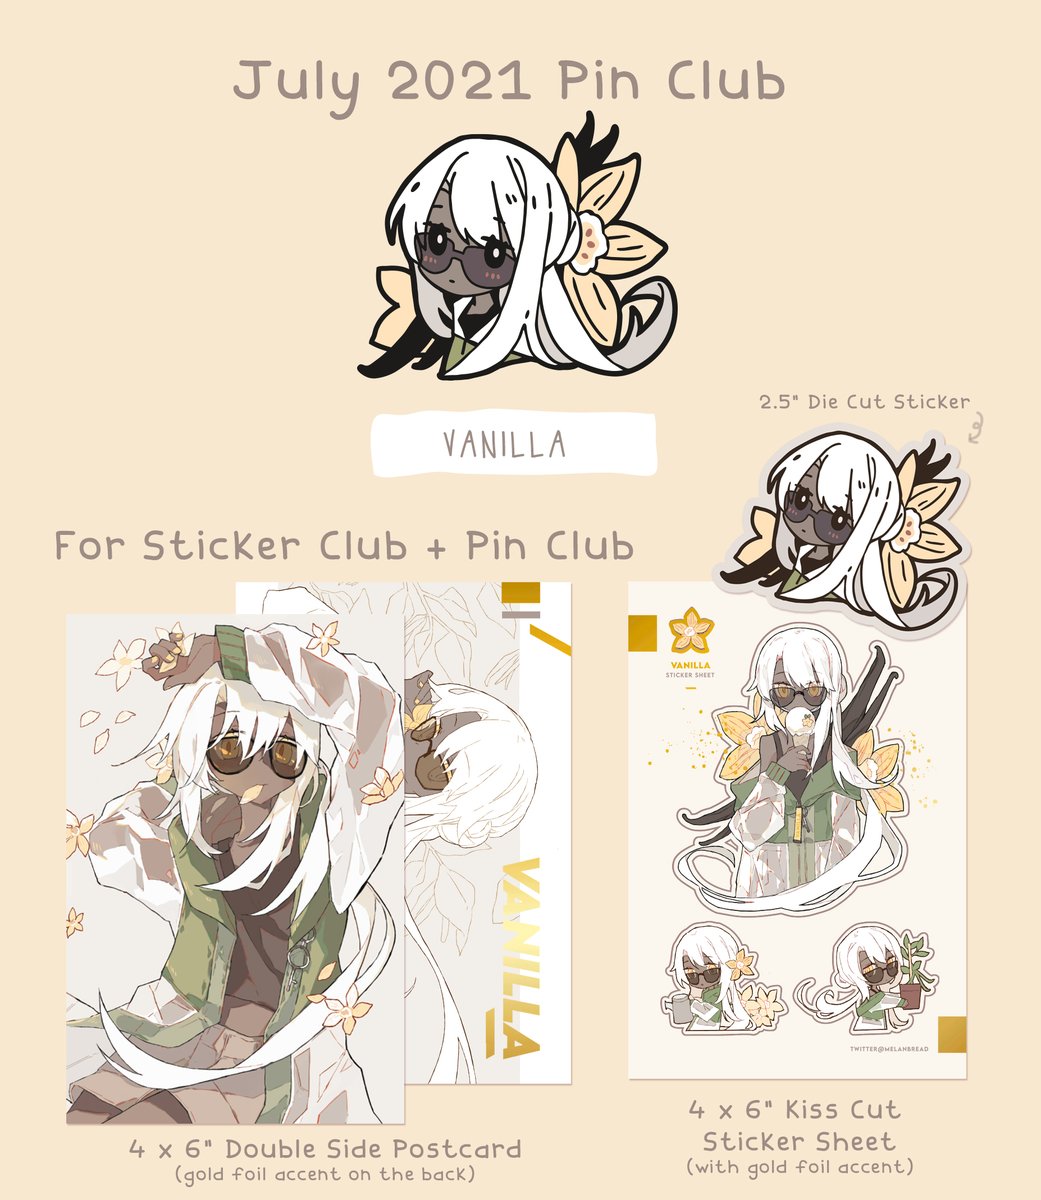 July's Patreon pin club theme is "Vanilla" featuring a girl with a hair bun like vanilla ice cream who cultivates vanilla plants. 

This month's merch will be 1 pin, 1 postcard + sticker sheet with foil accents & 1 die cut sticker. Pledge before June 30 to get these shipped.⁣⁣ 